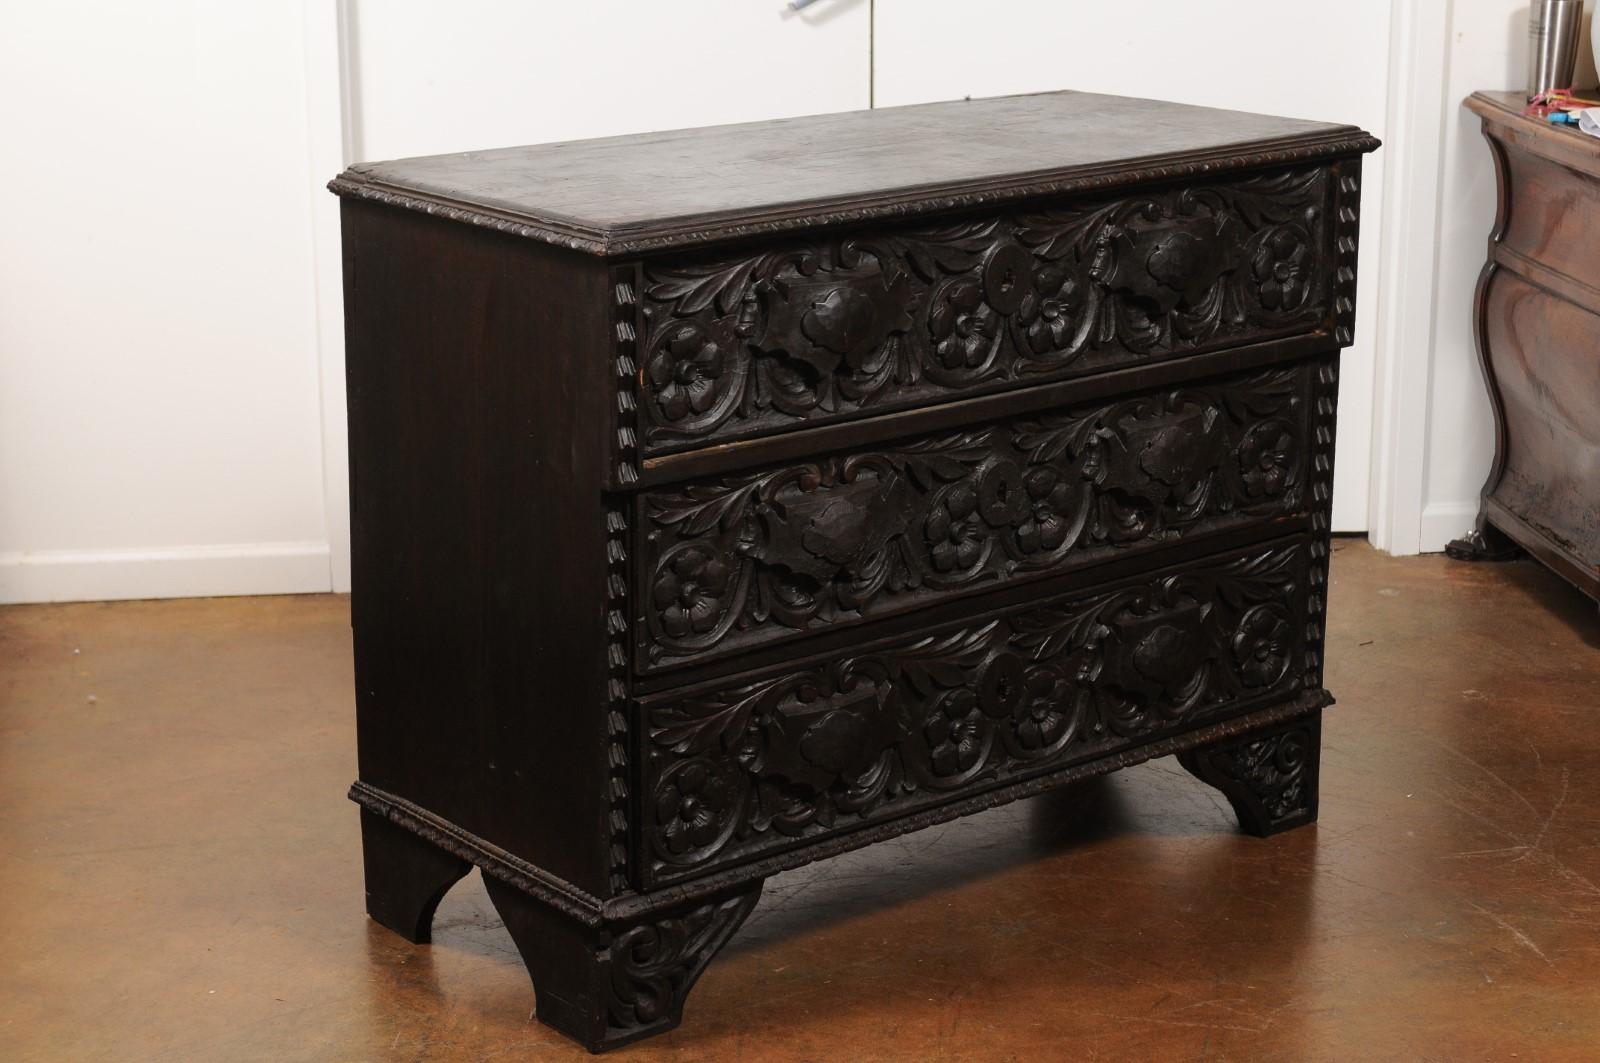 Wood Italian 1860s Three-Drawer Commode with Hand-Carved Scrollwork and Dark Patina